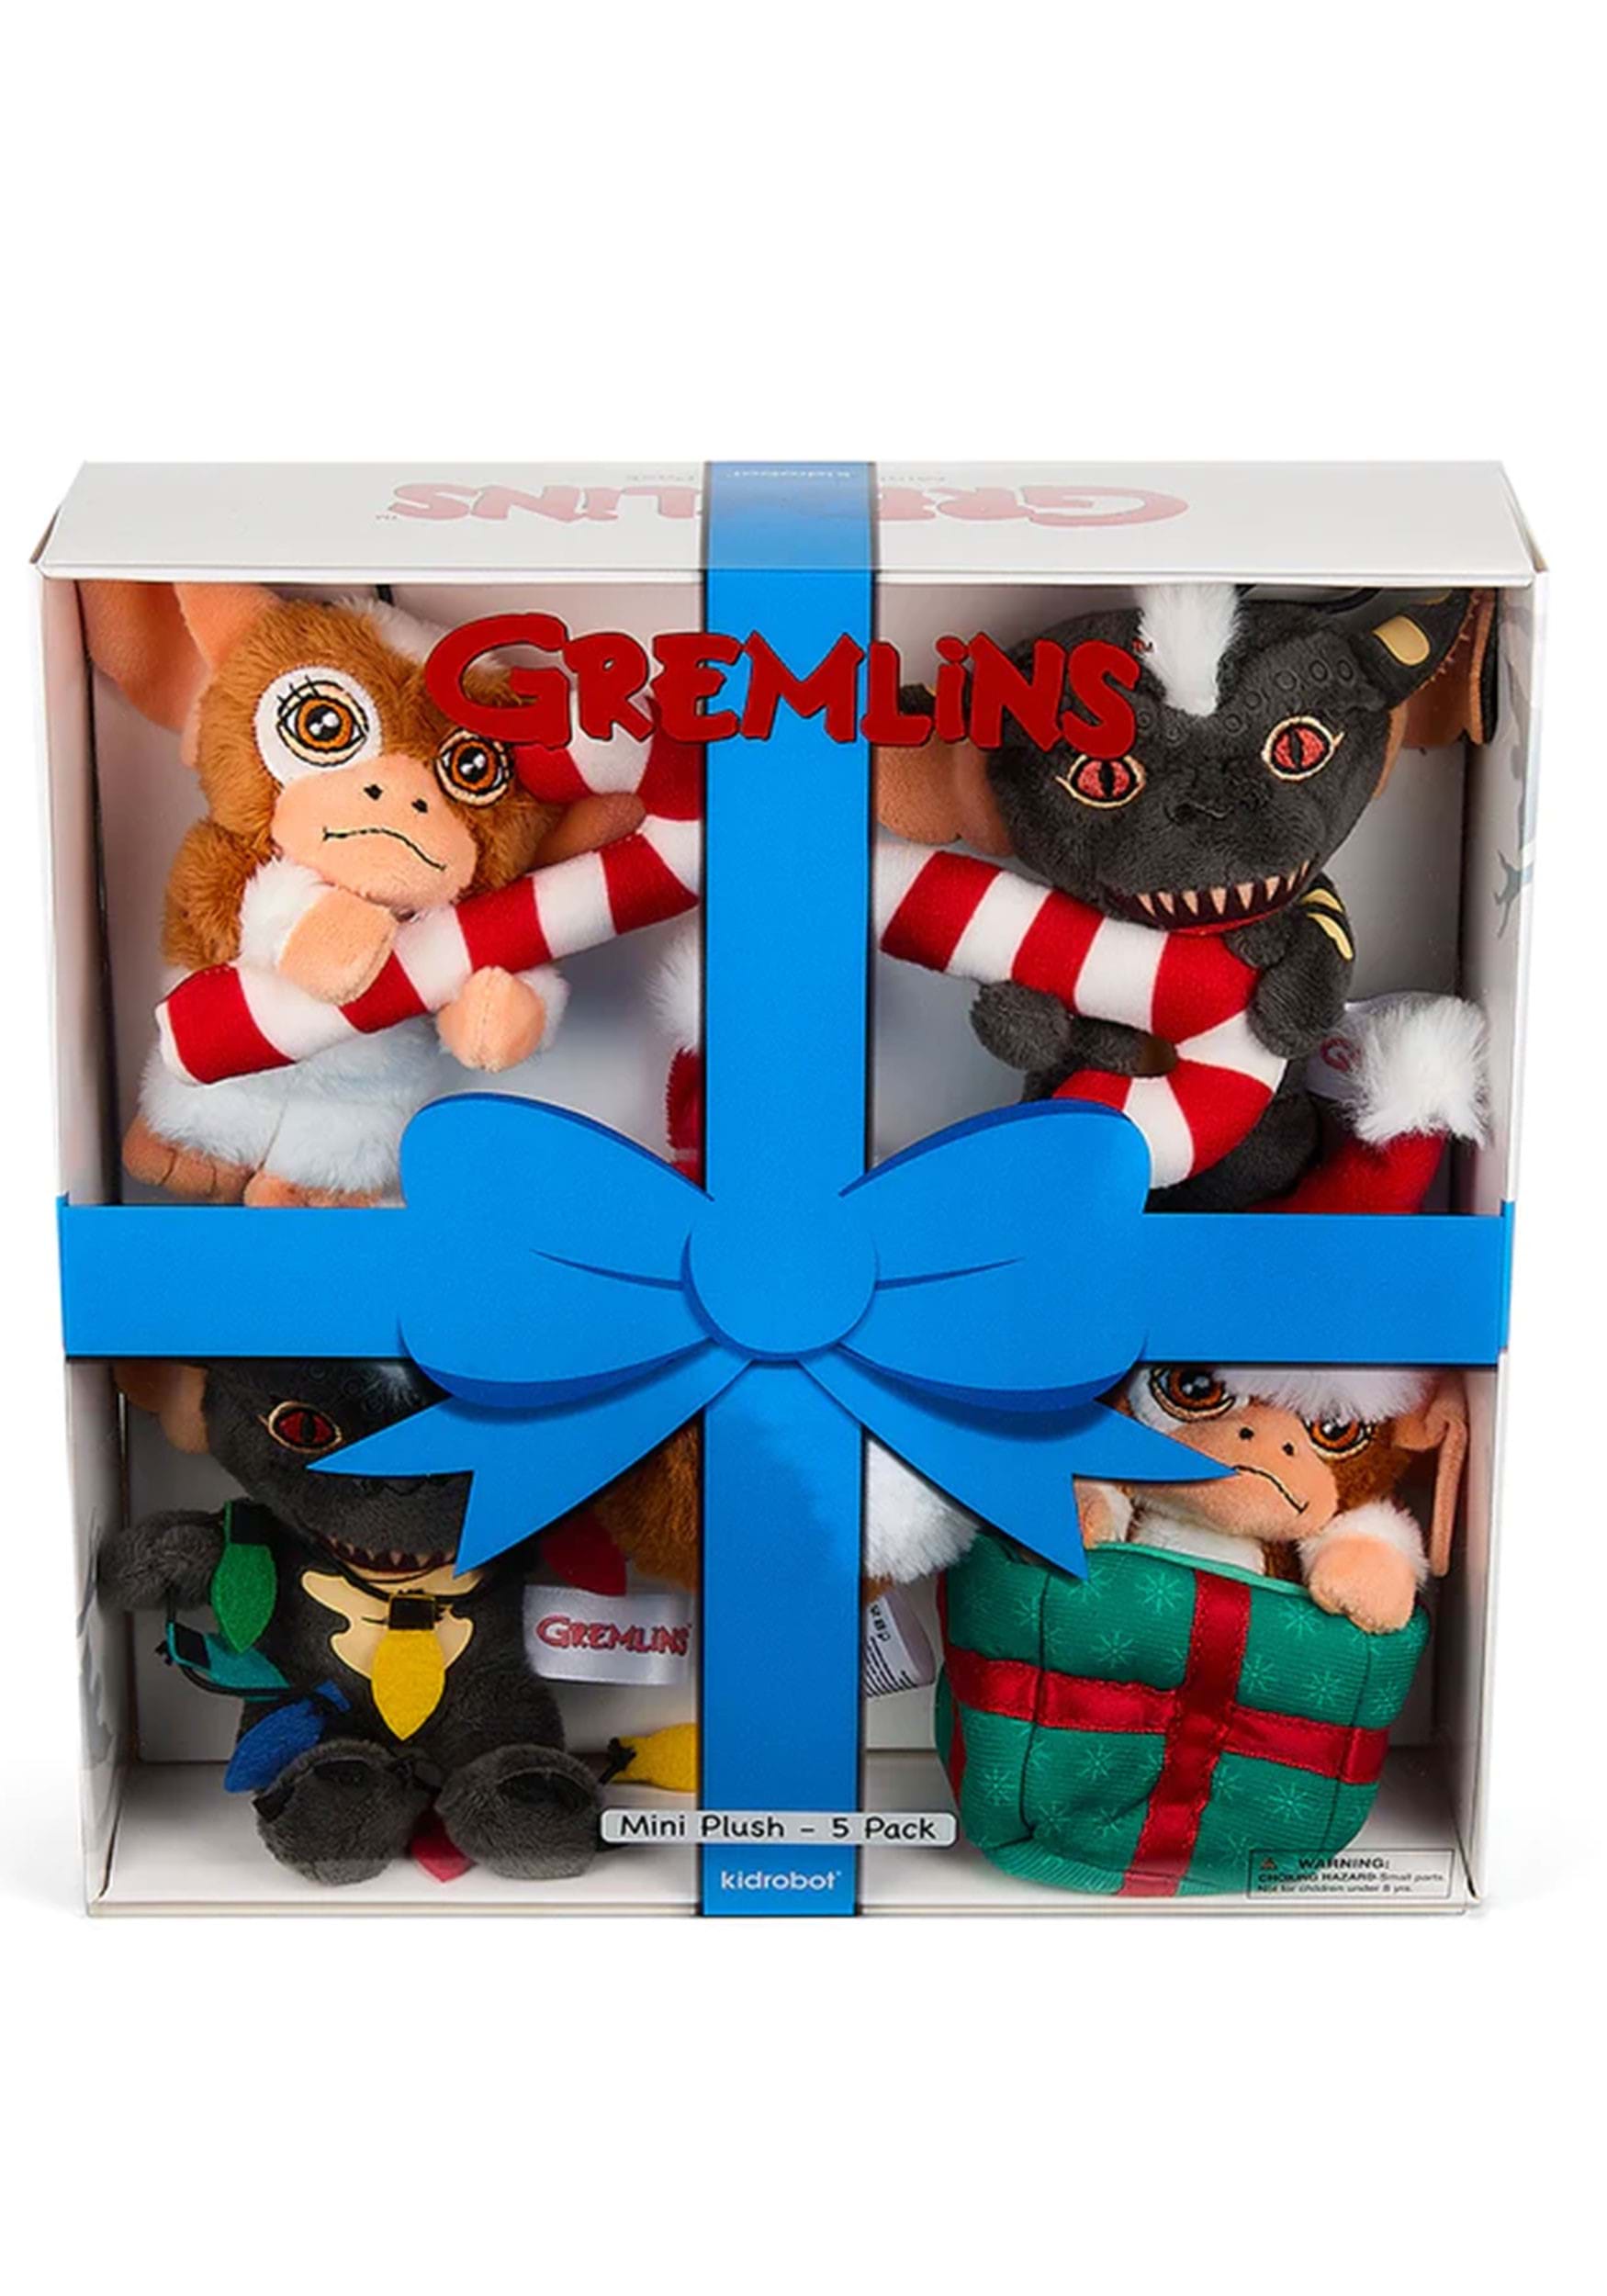 5 Pack Of Gremlins Holiday 3 Plush Ornament Set , Christmas Ornaments